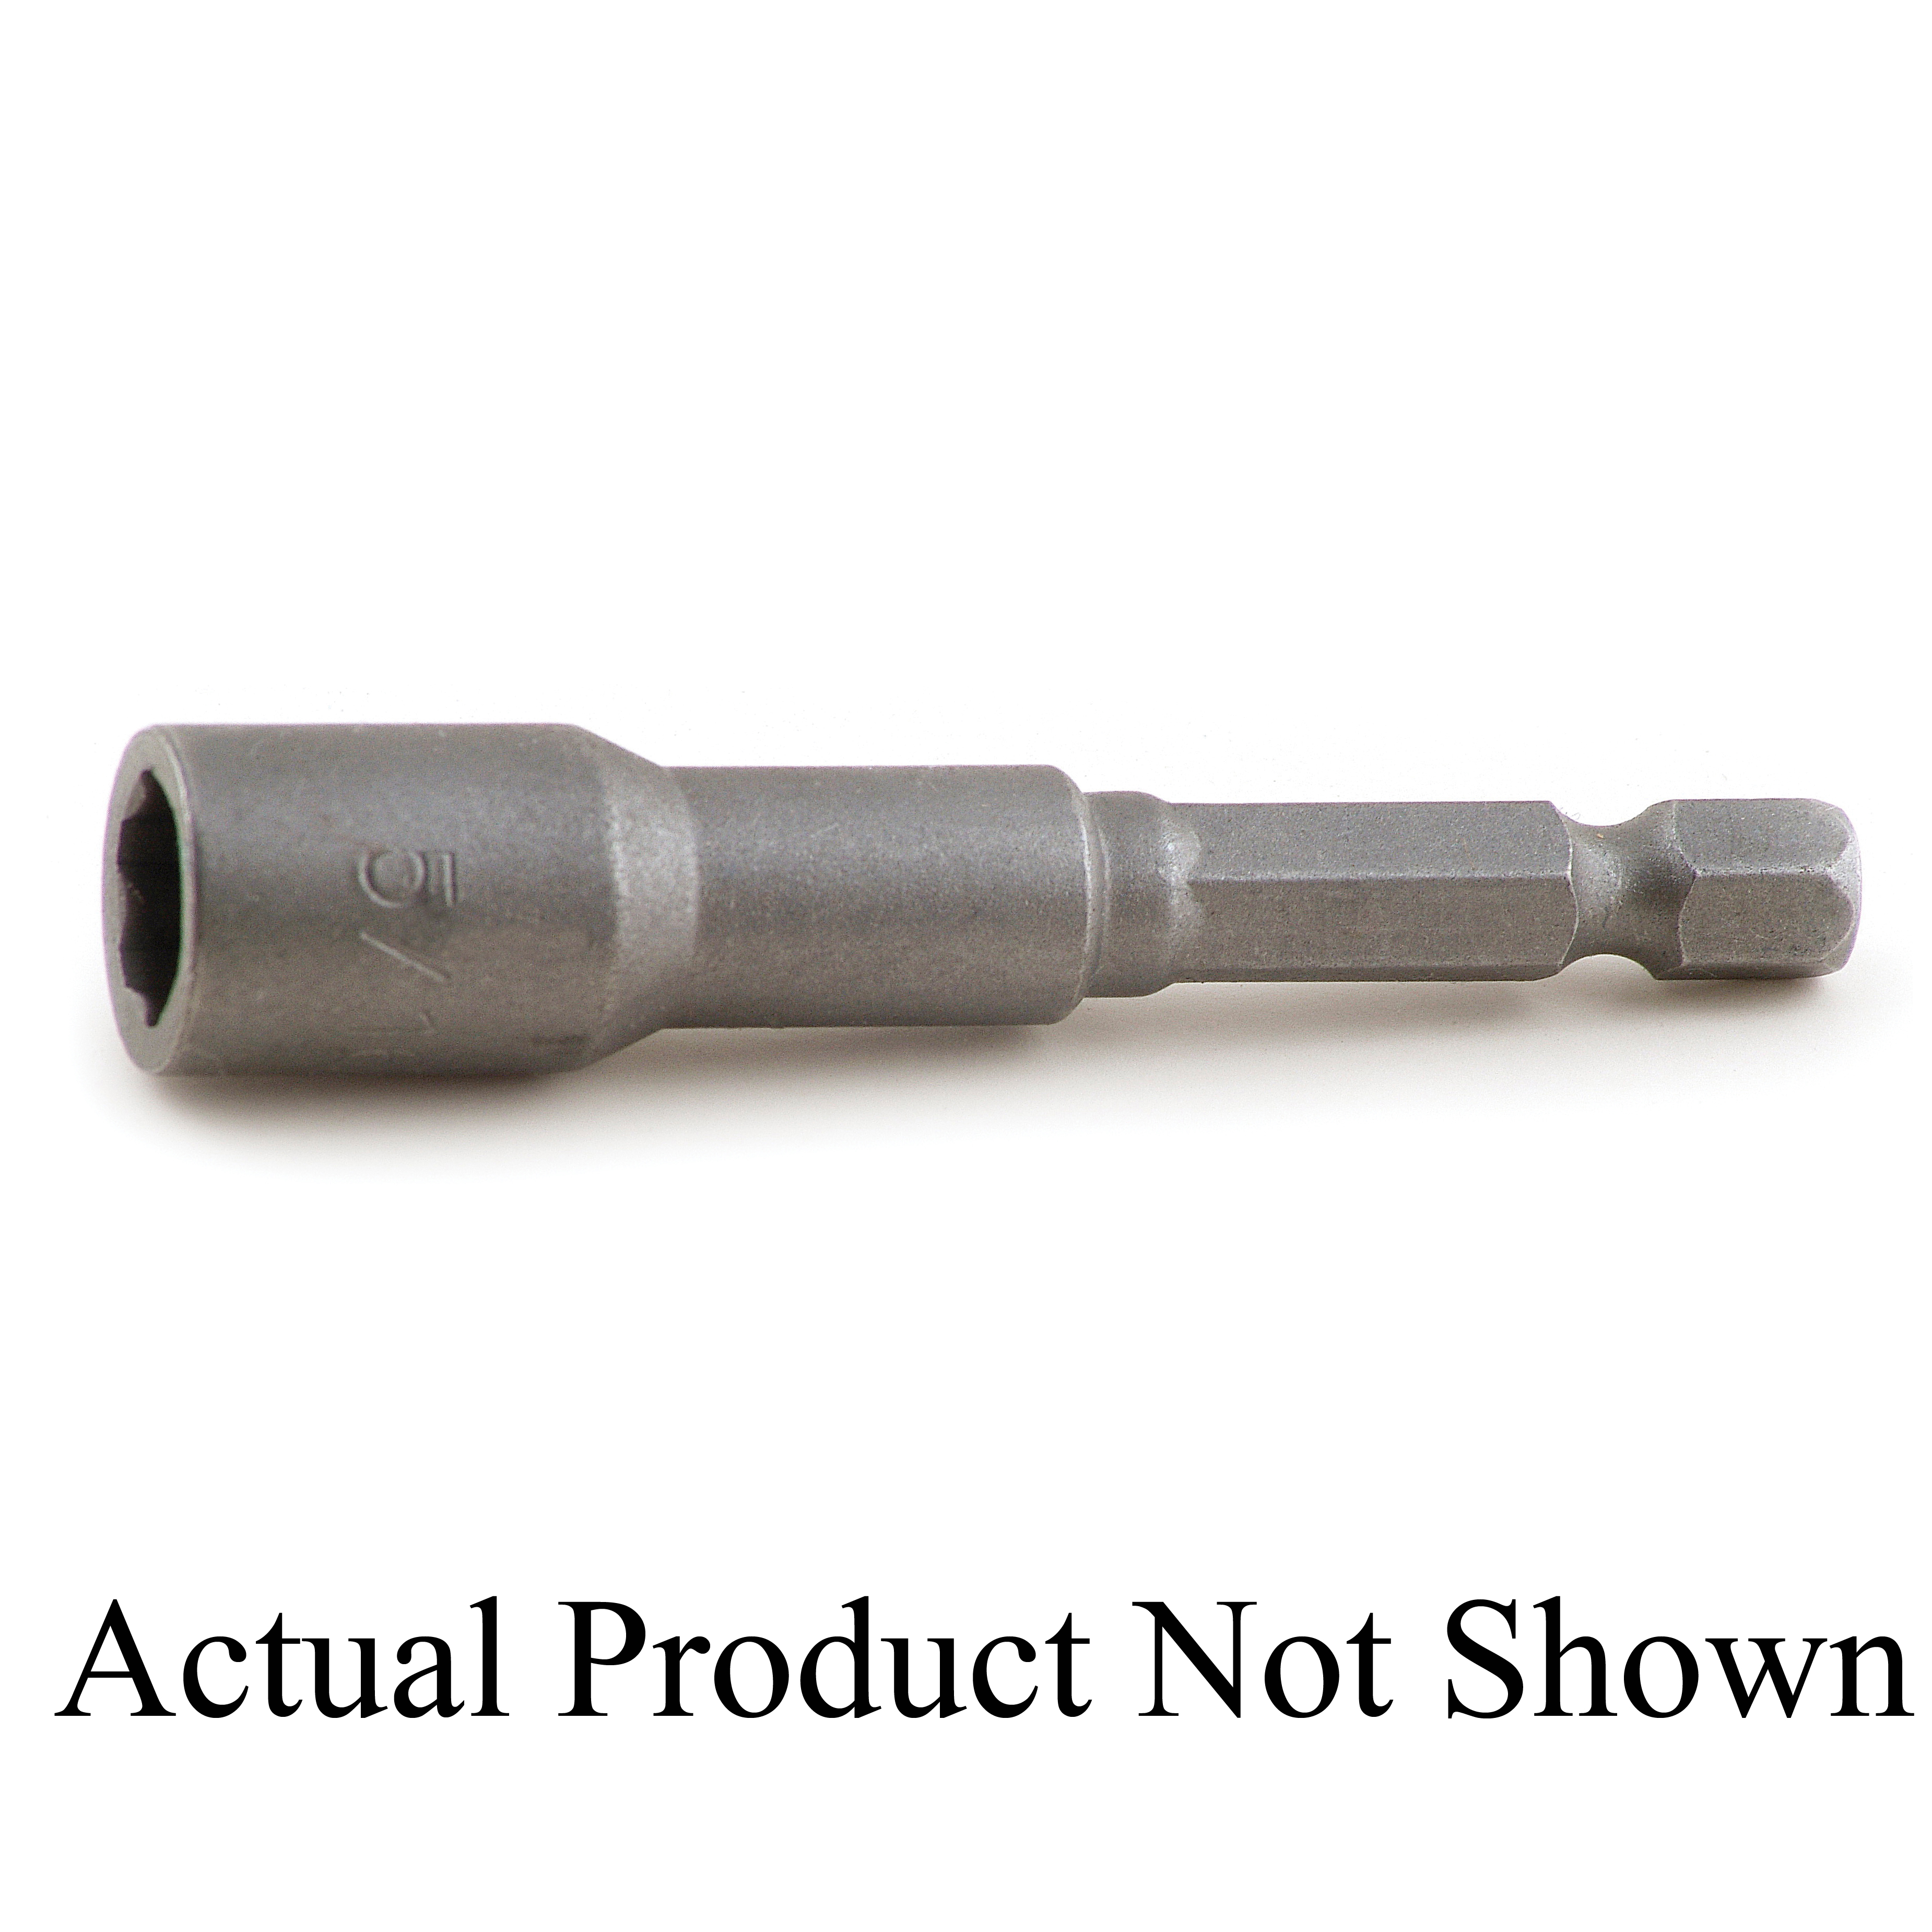 Stone Tools™ ST-MSHL3/8 Magnetic Nut Setter, 3/8 in Point, 2-9/16 in OAL, System of Measurement: Imperial